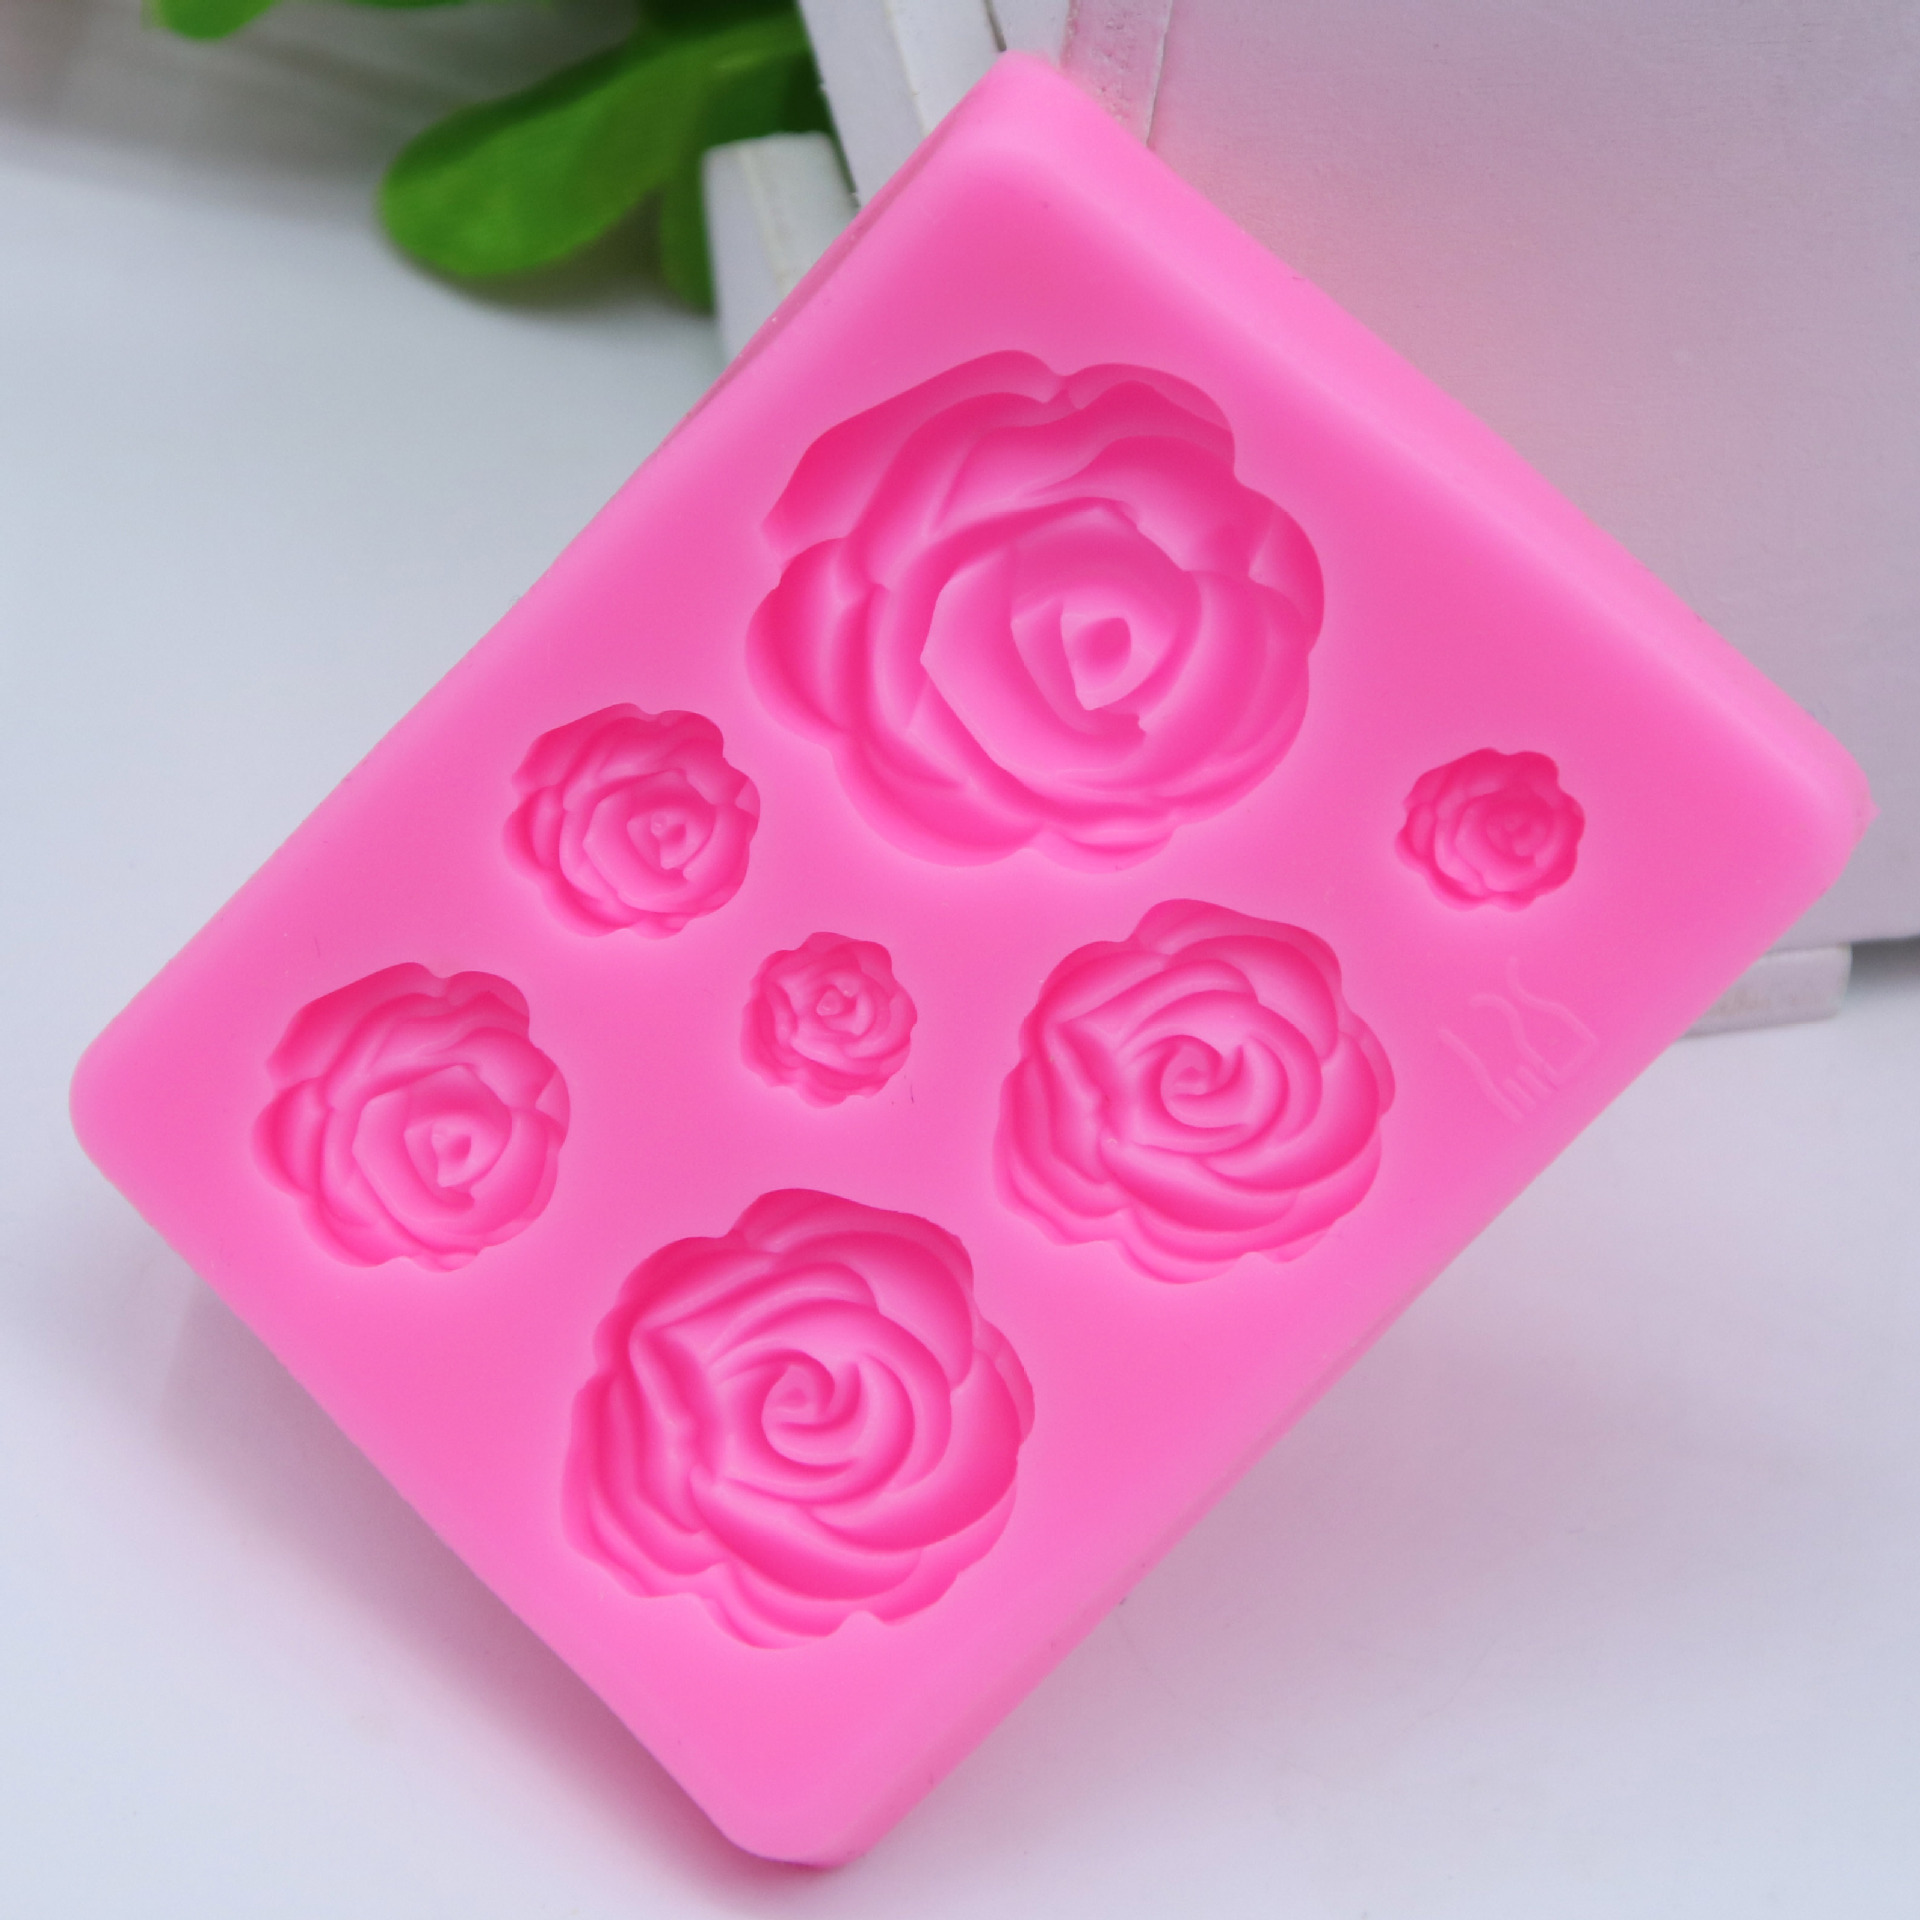 Large, medium and small 7 even 3D rose flower silicone mold sugar chocolate cake mold